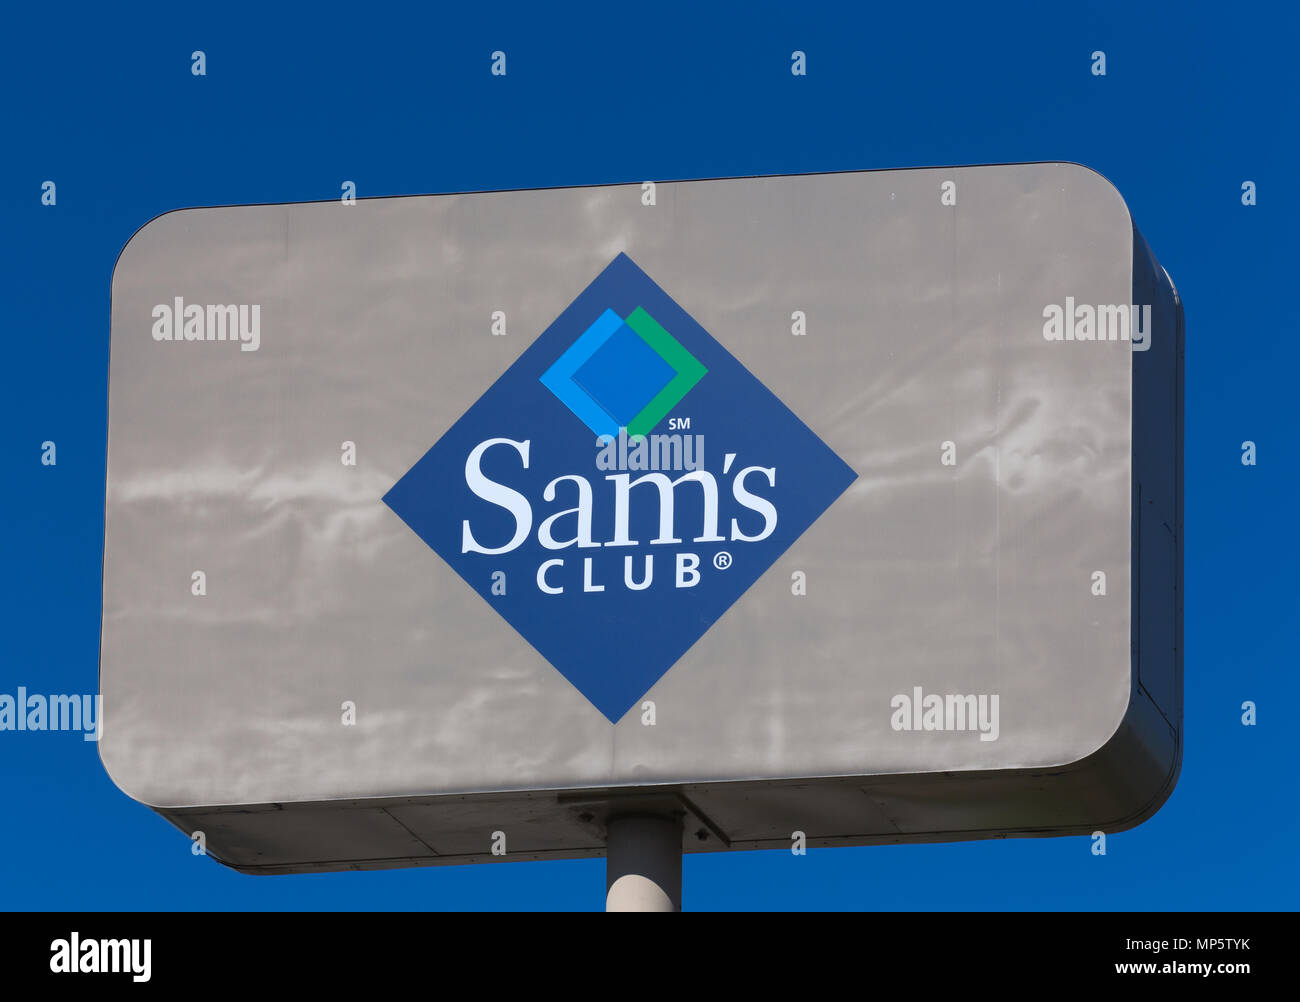 BLOOMINGTON, MN/USA - JUNE 21, 2014: Sam's Club exterior sign. Sam's Club is an American chain of membership-only retail warehouse clubs. Stock Photo